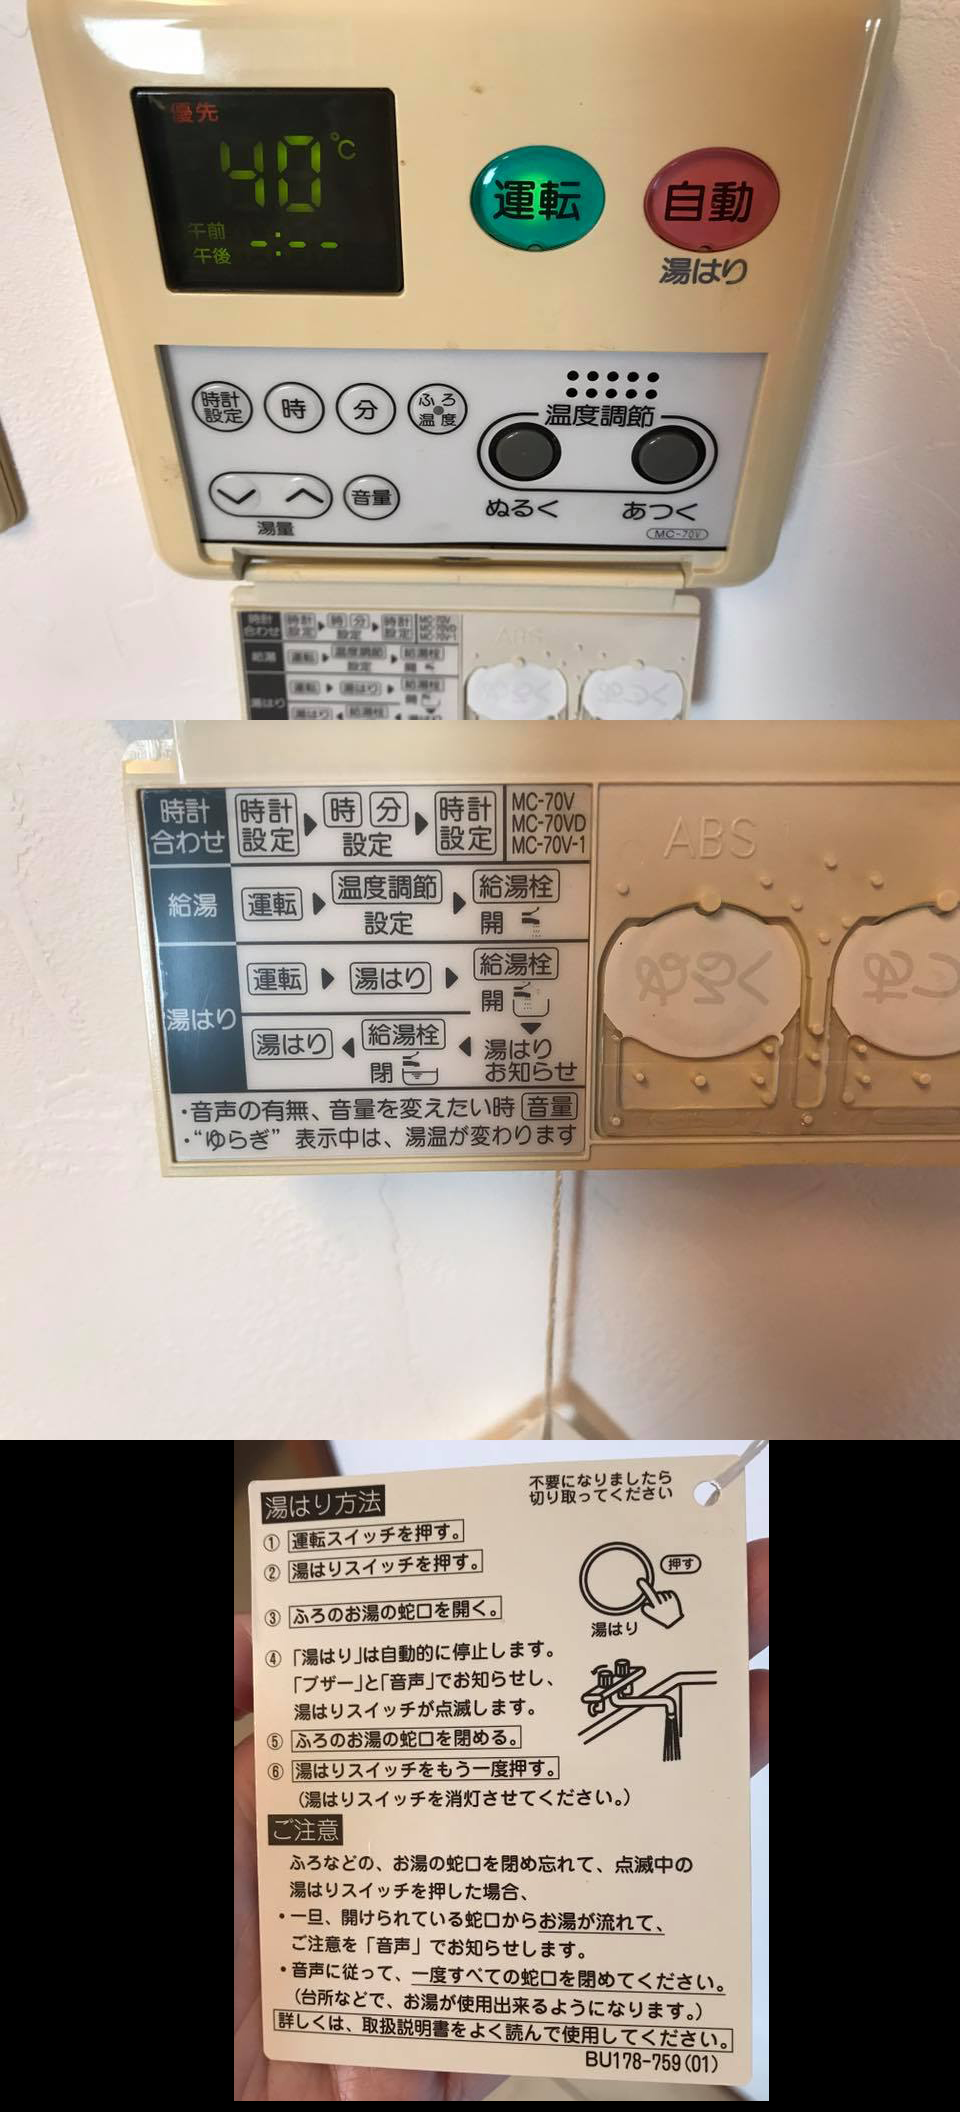 Japanese English Water Heater Or Heater Control Panel I M